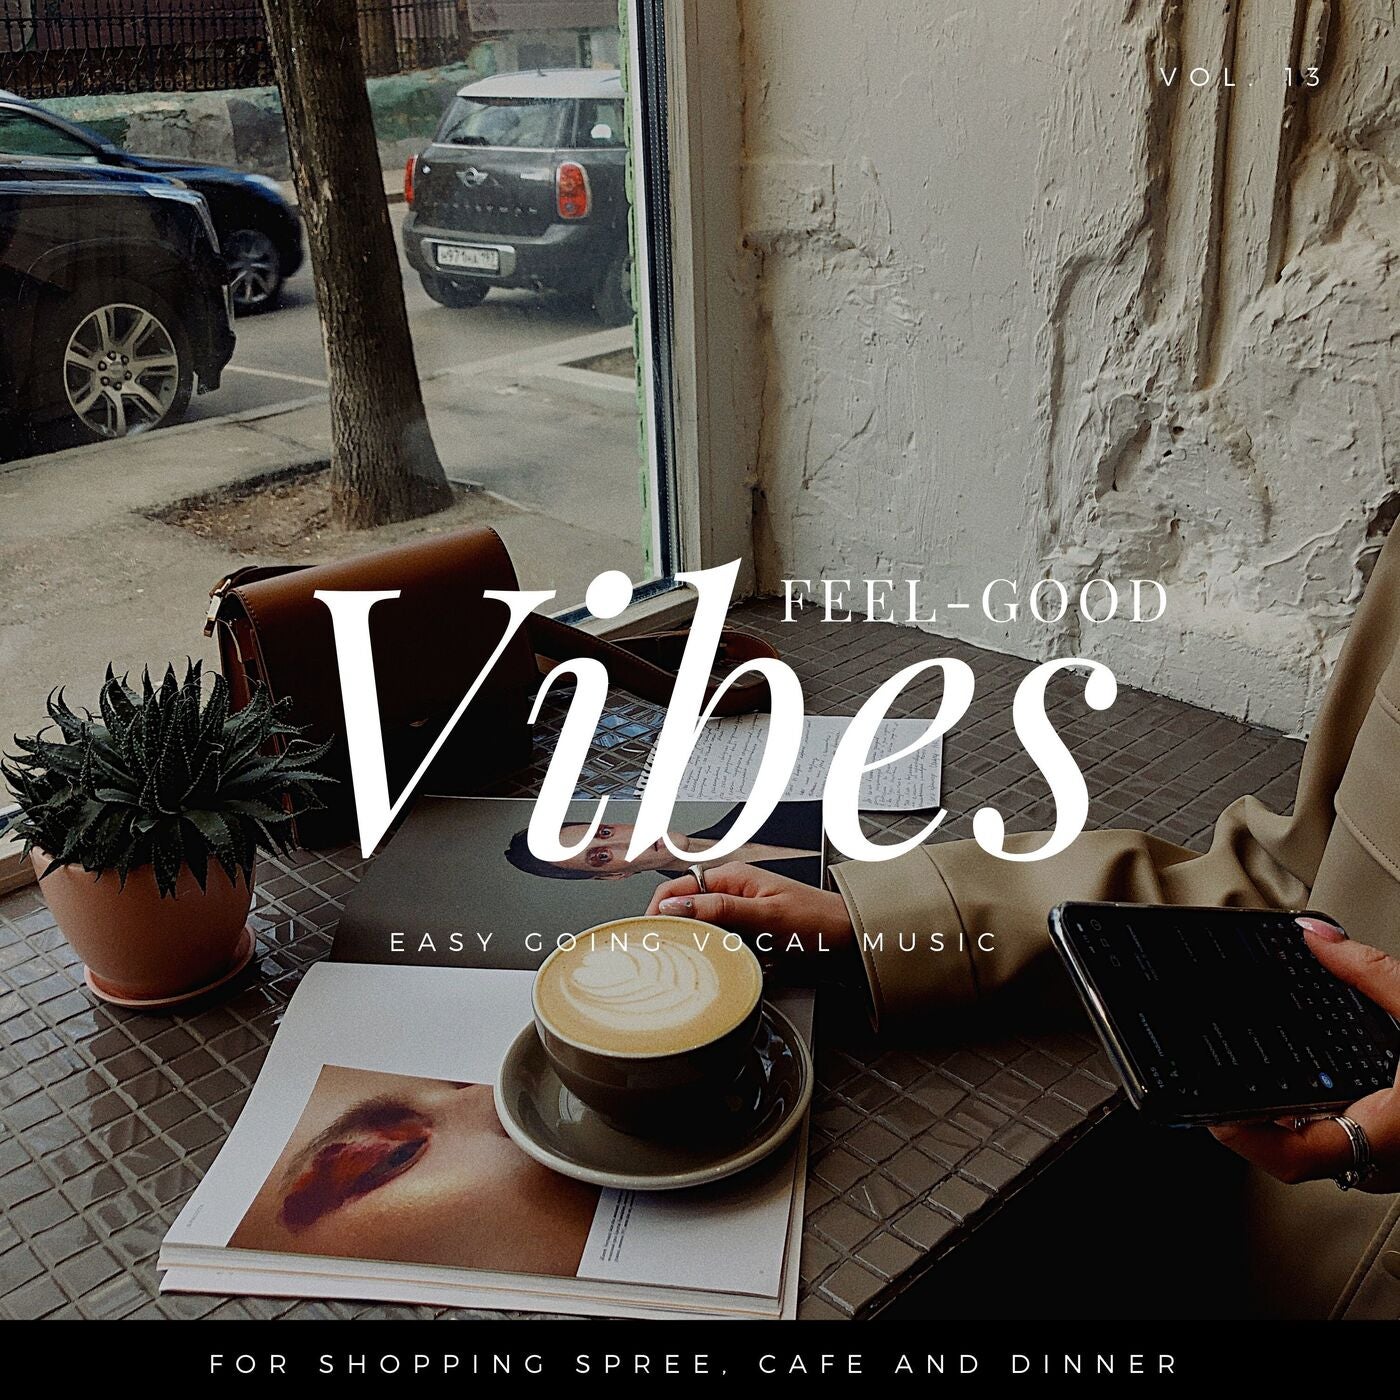 Feel-Good Vibes - Easy Going Vocal Music For Shopping Spree, Cafe And Dinner, Vol. 13